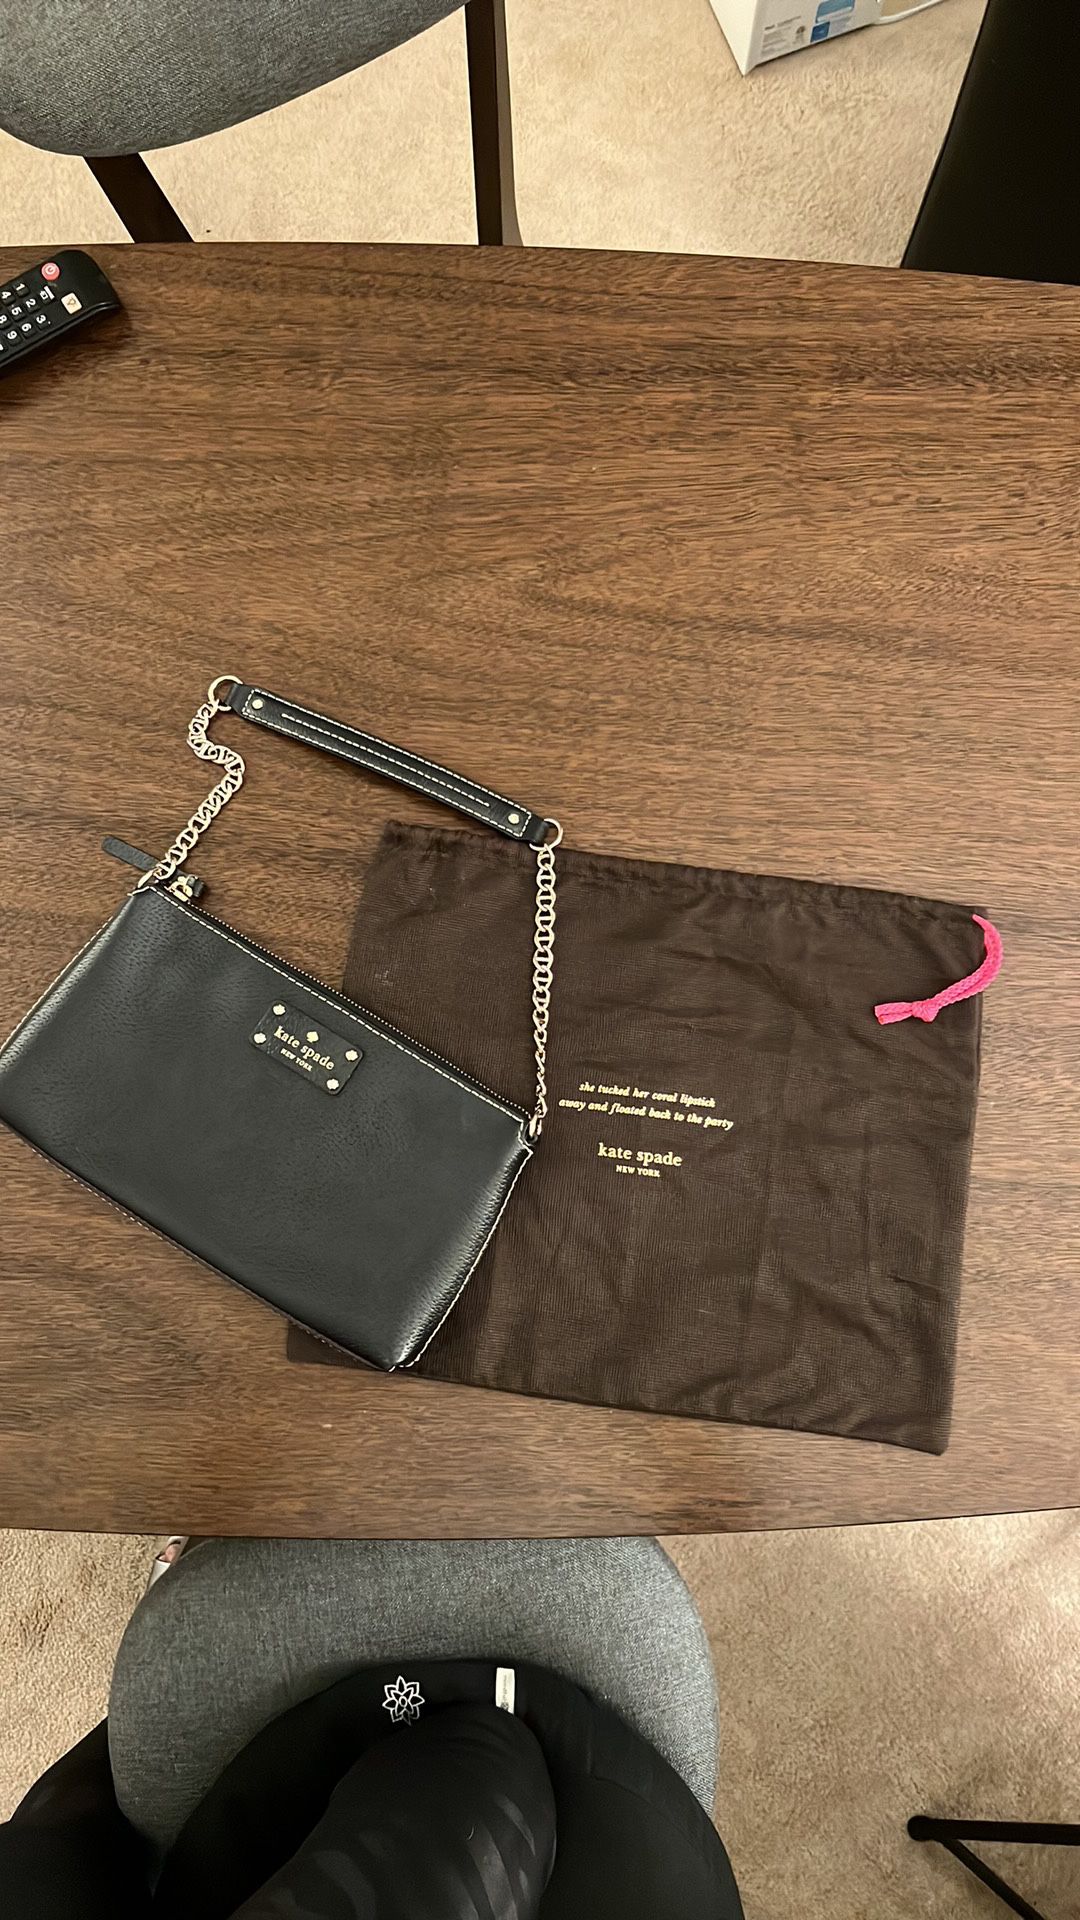 Kate Spade Black Purse With Gold Chain Handle for Sale in Marina Del Rey,  CA - OfferUp